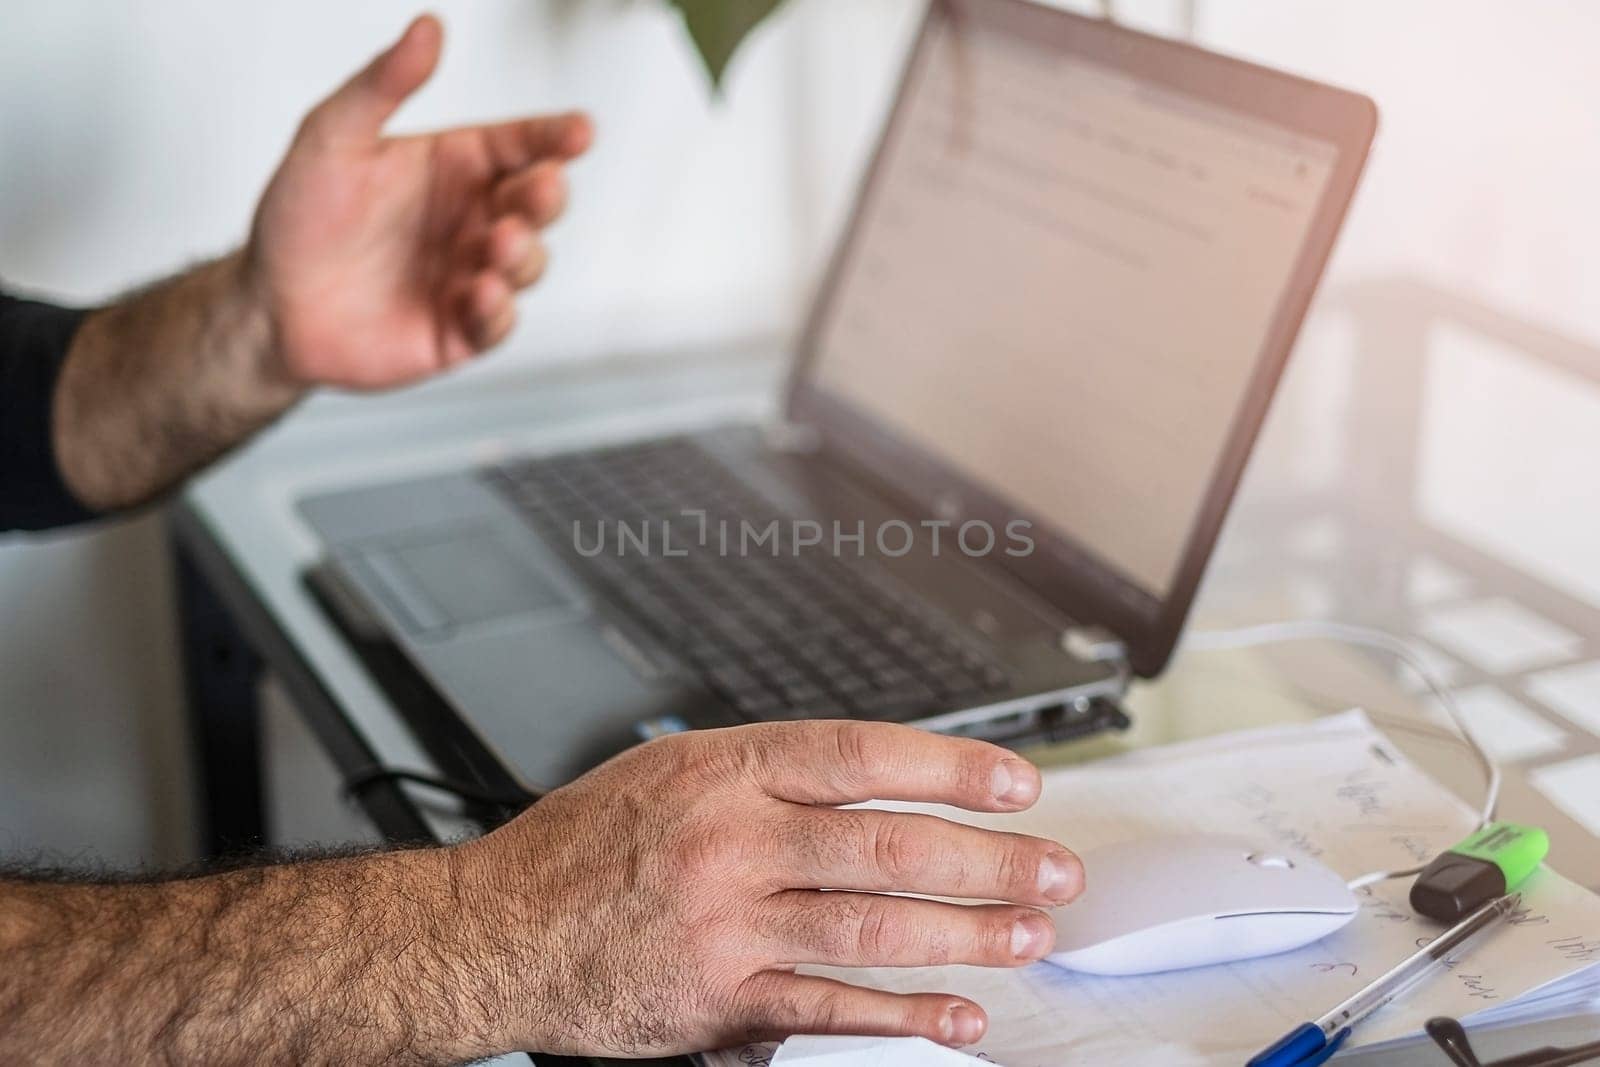 A man's using laptop hand on mouse and shows the screen.